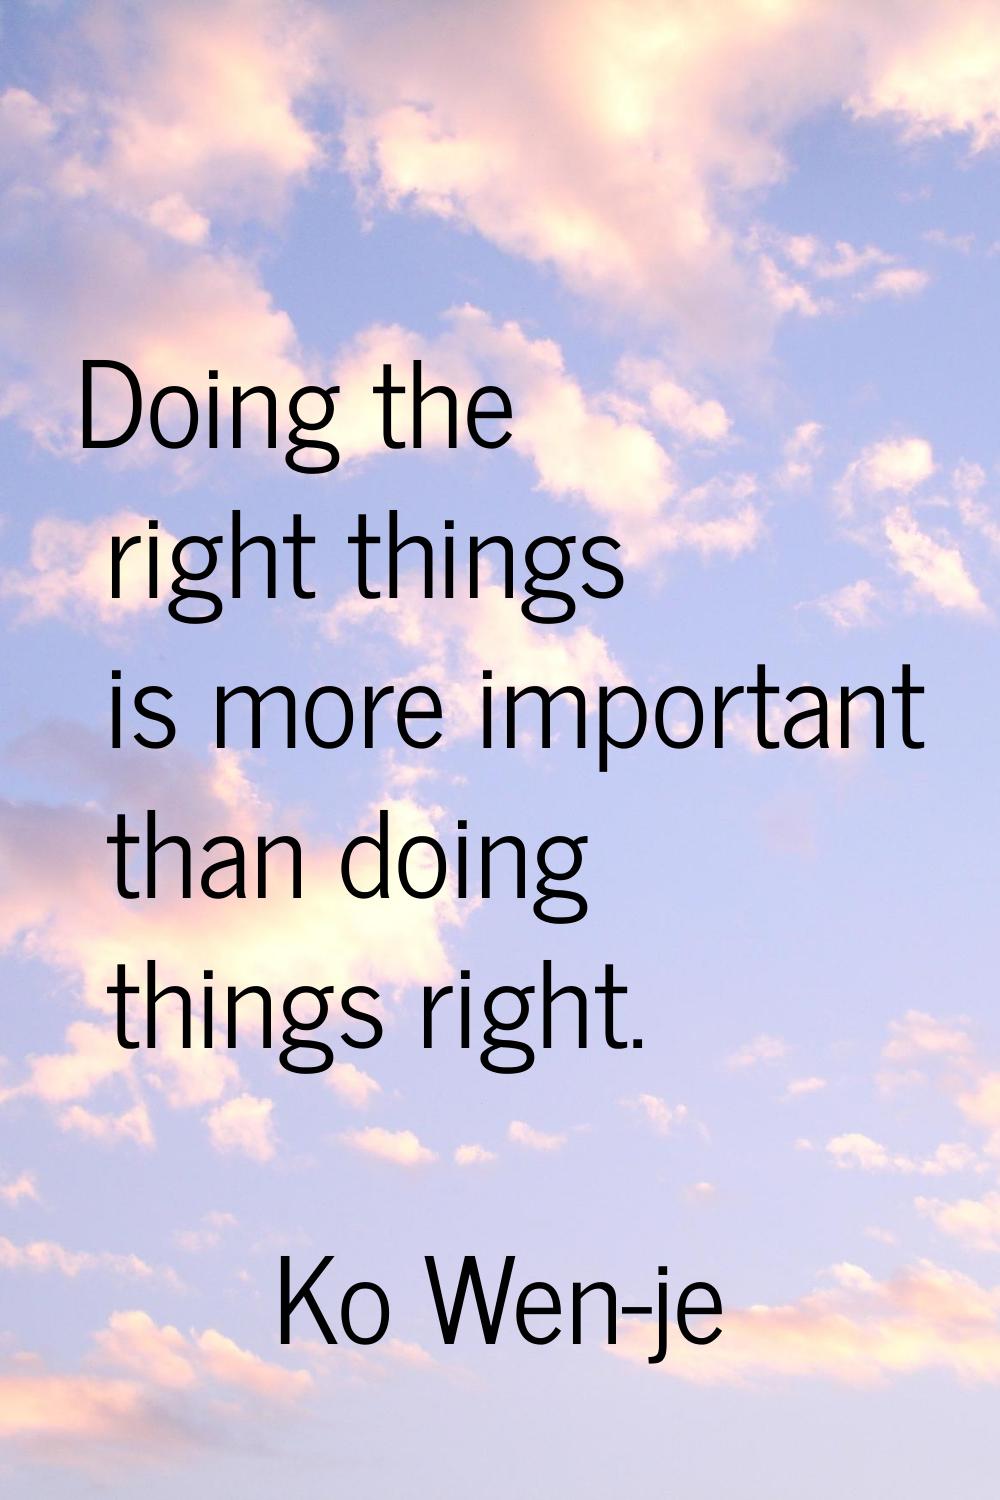 Doing the right things is more important than doing things right.